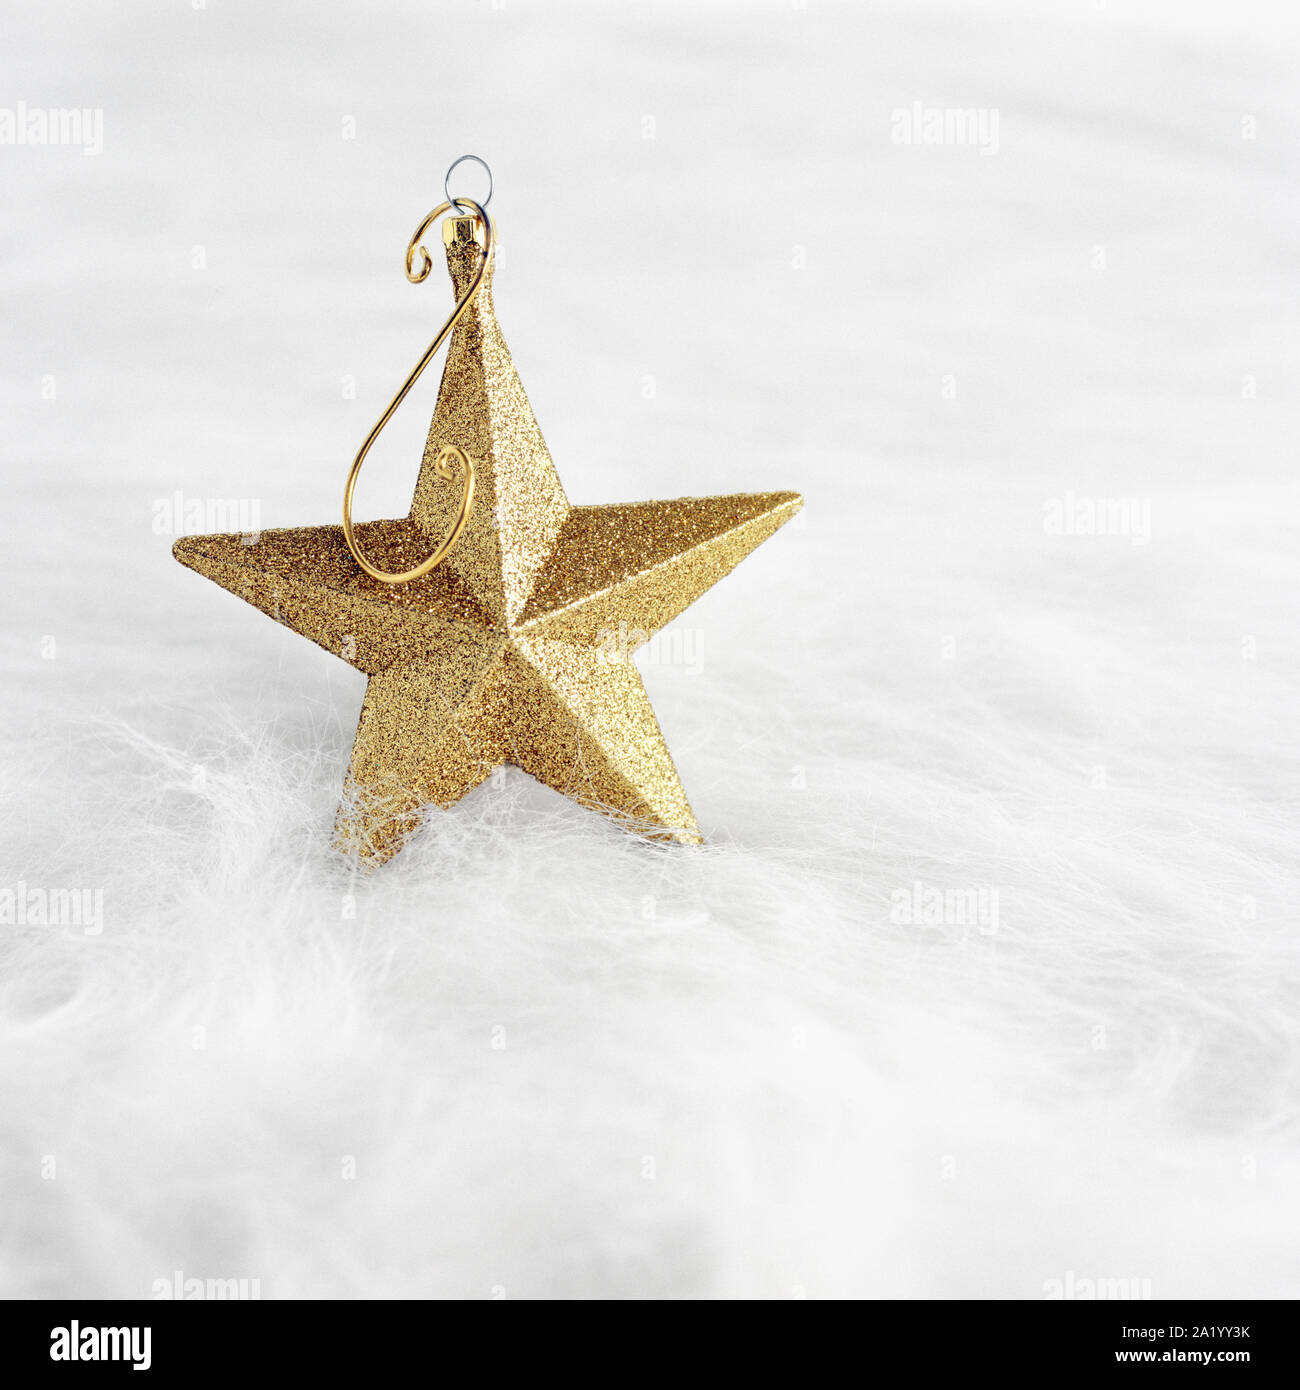 Close-up closeup of gold glitter star shaped Christmas ornament on white fur background. Elegant, fancy, shiny, bright holiday decorations. Stock Photo